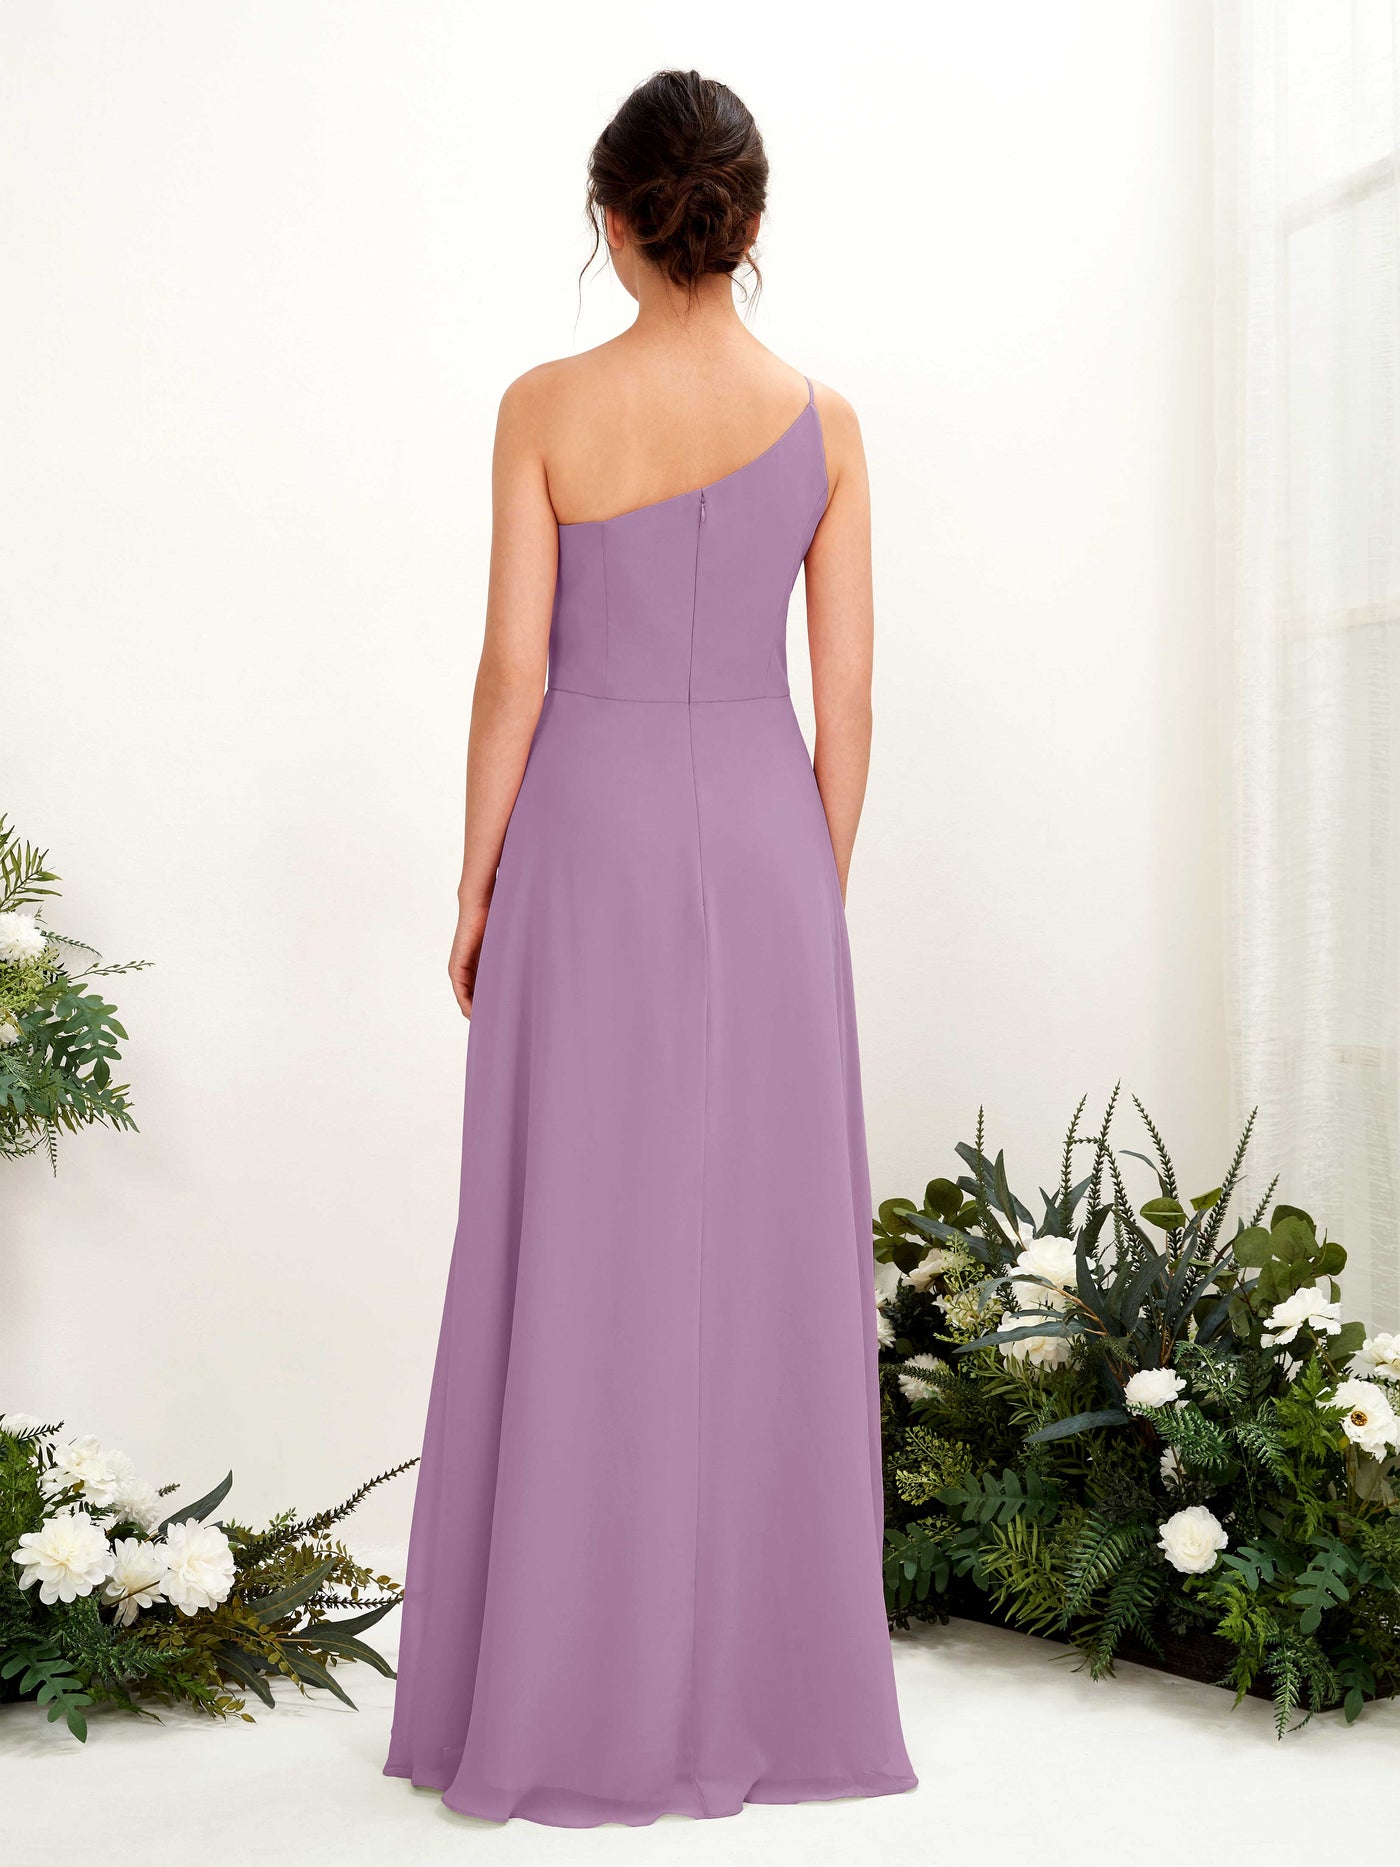 Orchid Mist Bridesmaid Dresses Bridesmaid Dress A-line Chiffon One Shoulder Full Length Sleeveless Wedding Party Dress (81225721)#color_orchid-mist